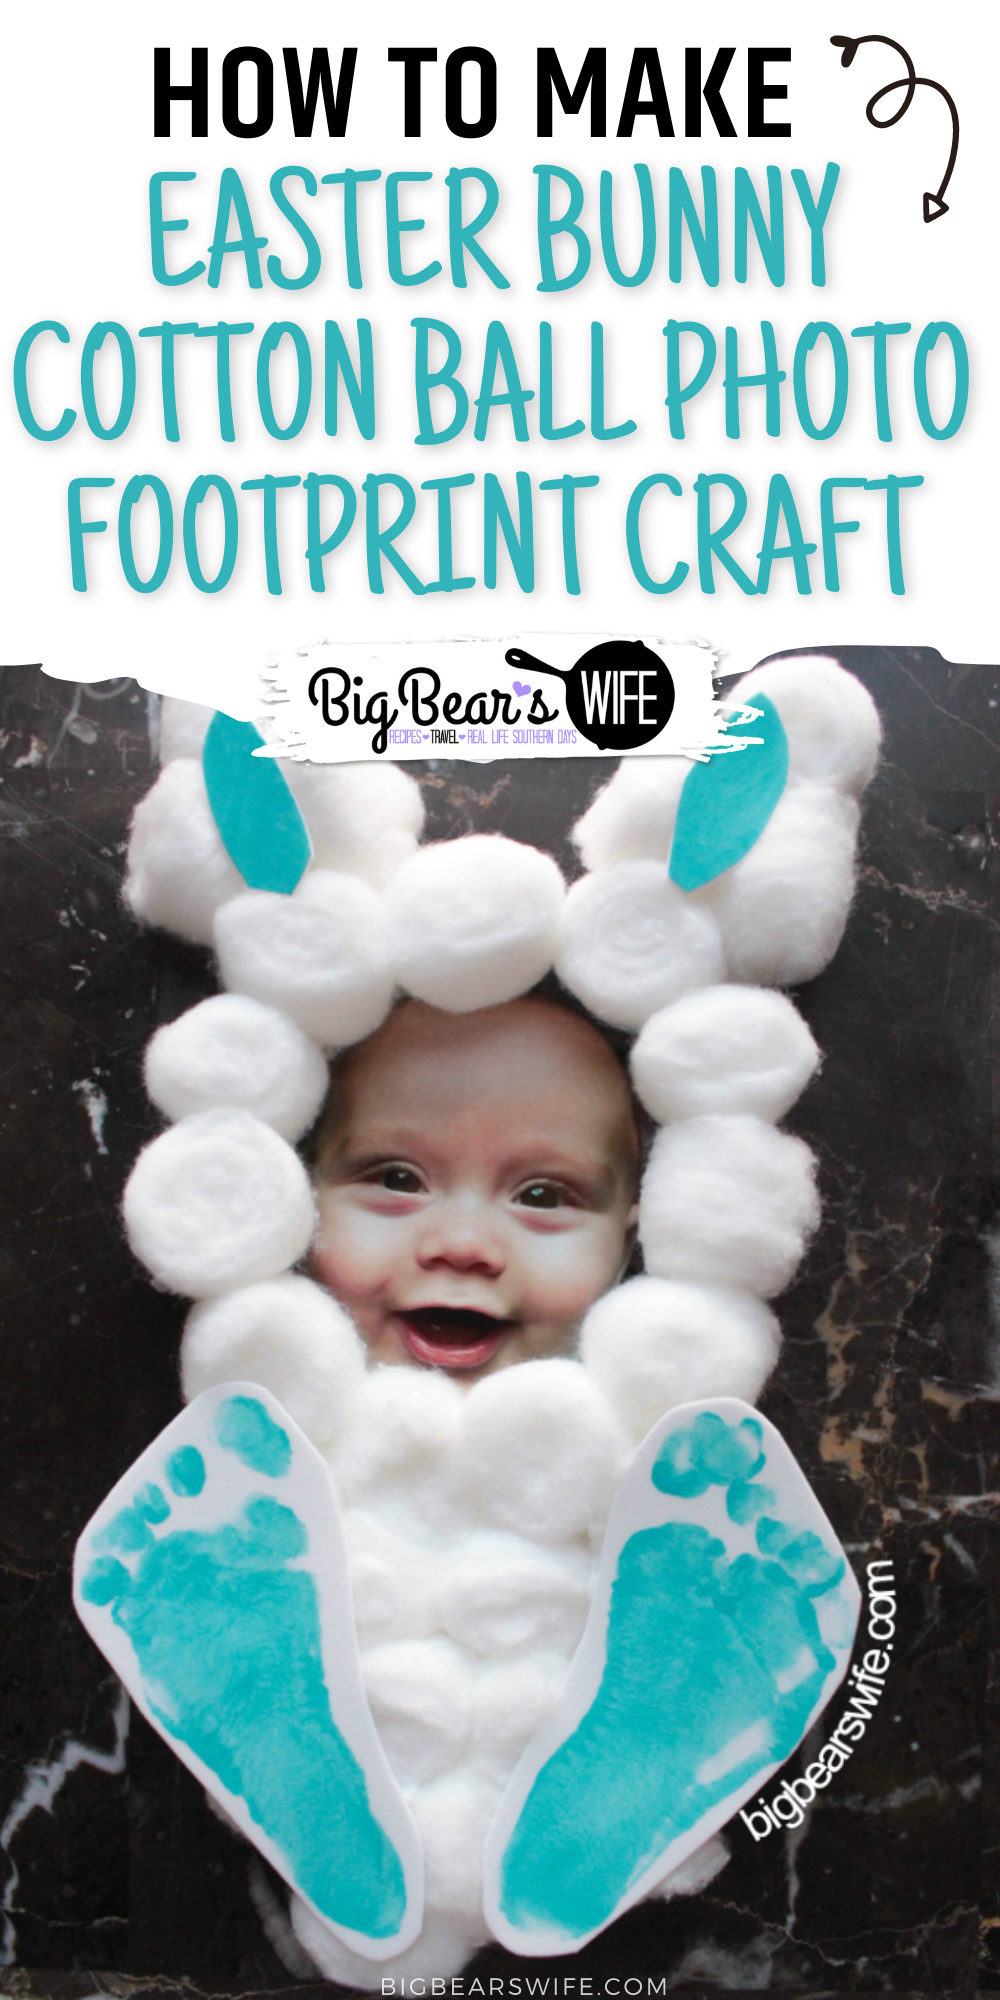 This adorable Easter Bunny Cotton Ball Photo Footprint Craft turns your little one into the cutest Easter bunny on the block! It takes just a few items from the craft store, a picture and about 10 minutes to create. via @bigbearswife